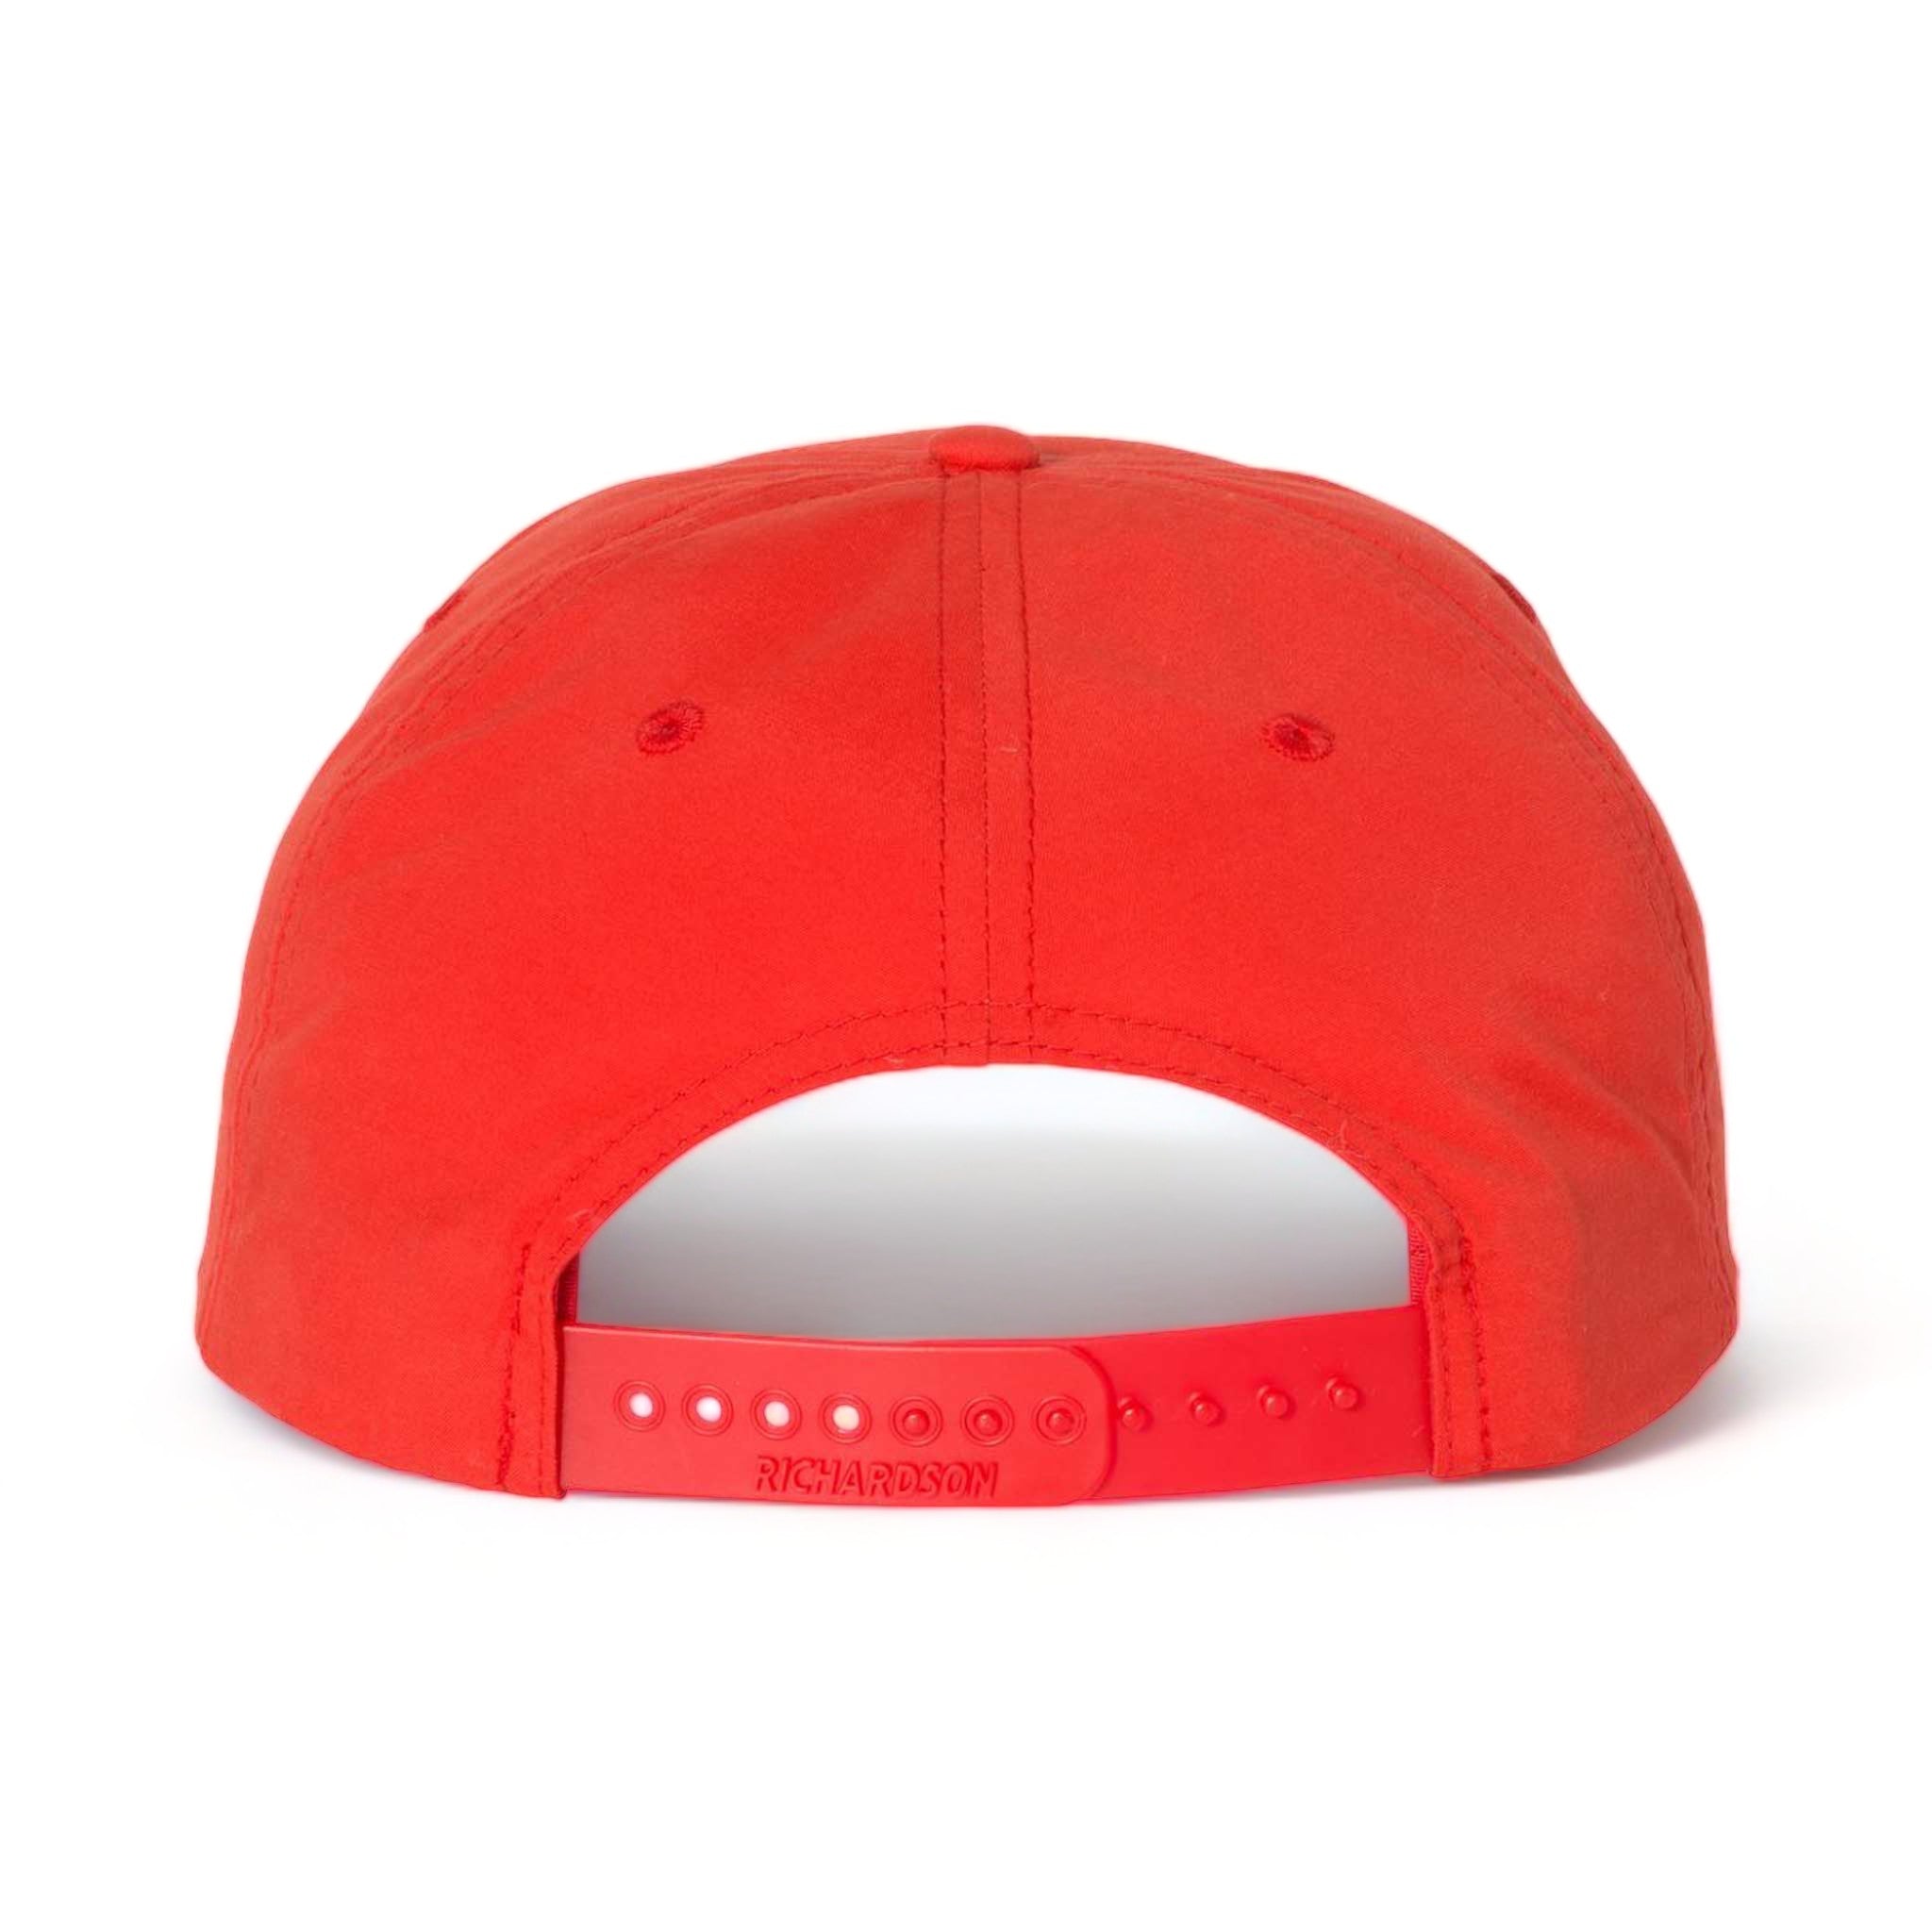 Back view of Richardson 256 custom hat in red and white